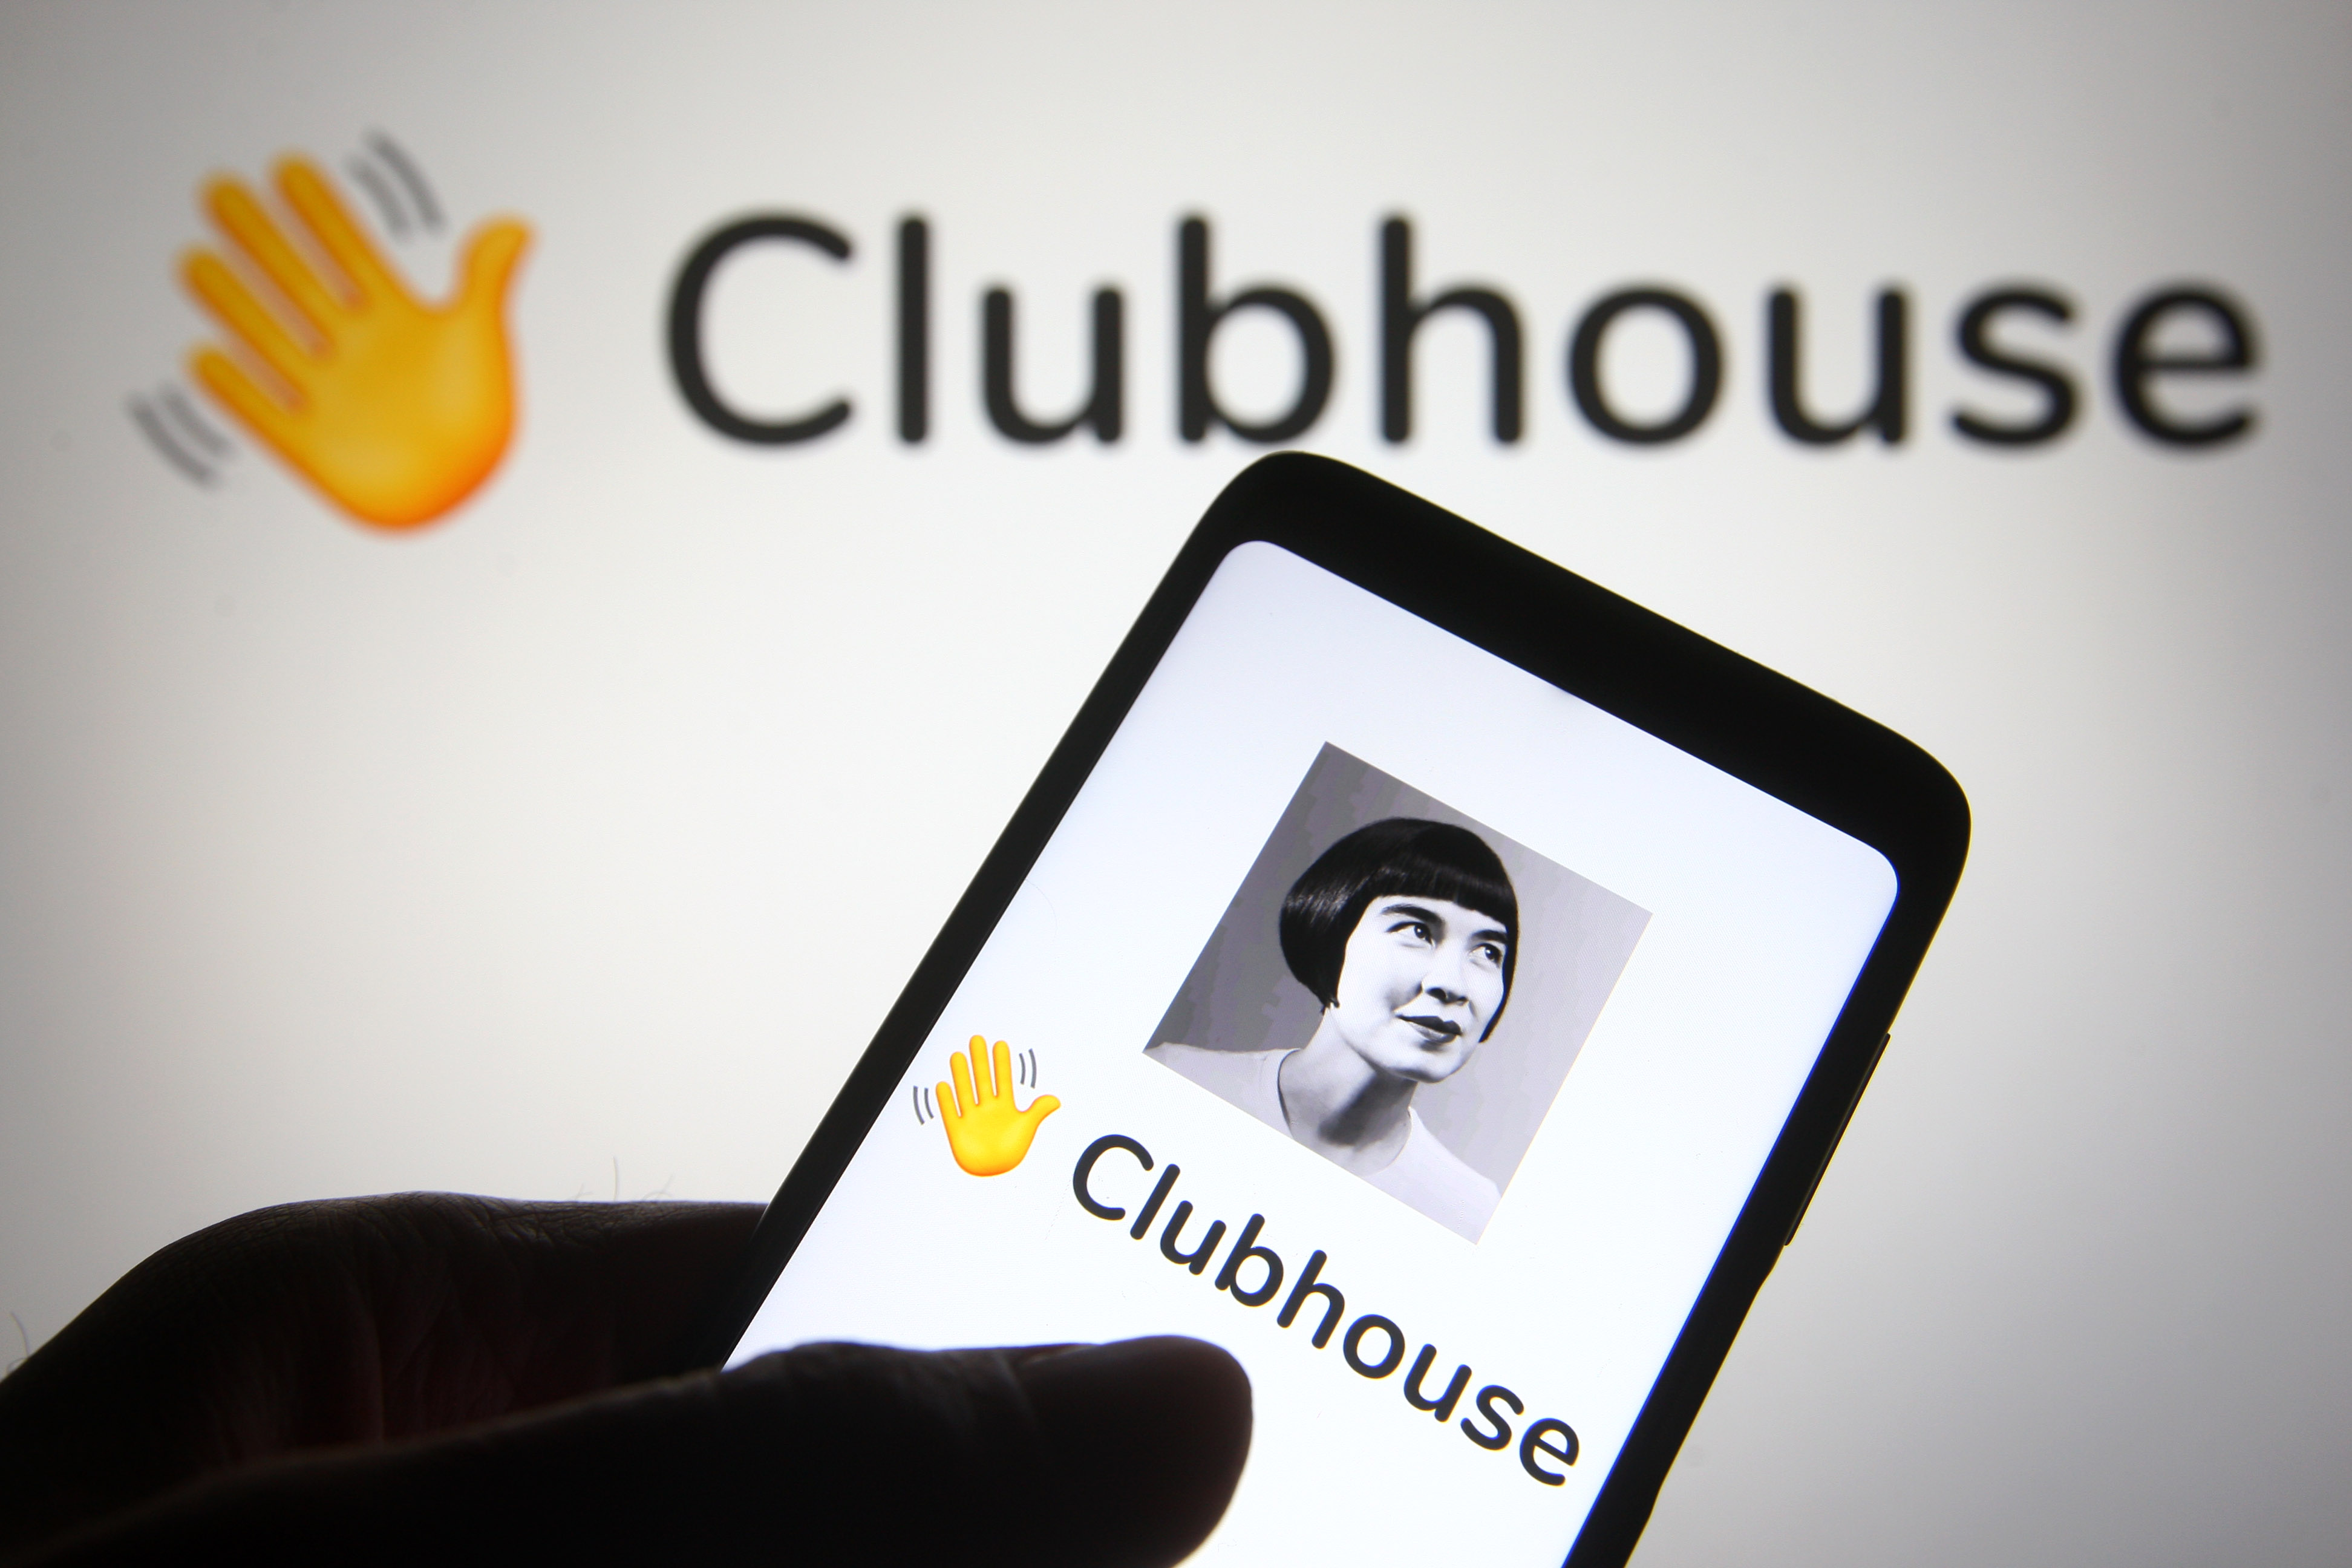 Clubhouse adds chat function for those who would rather text